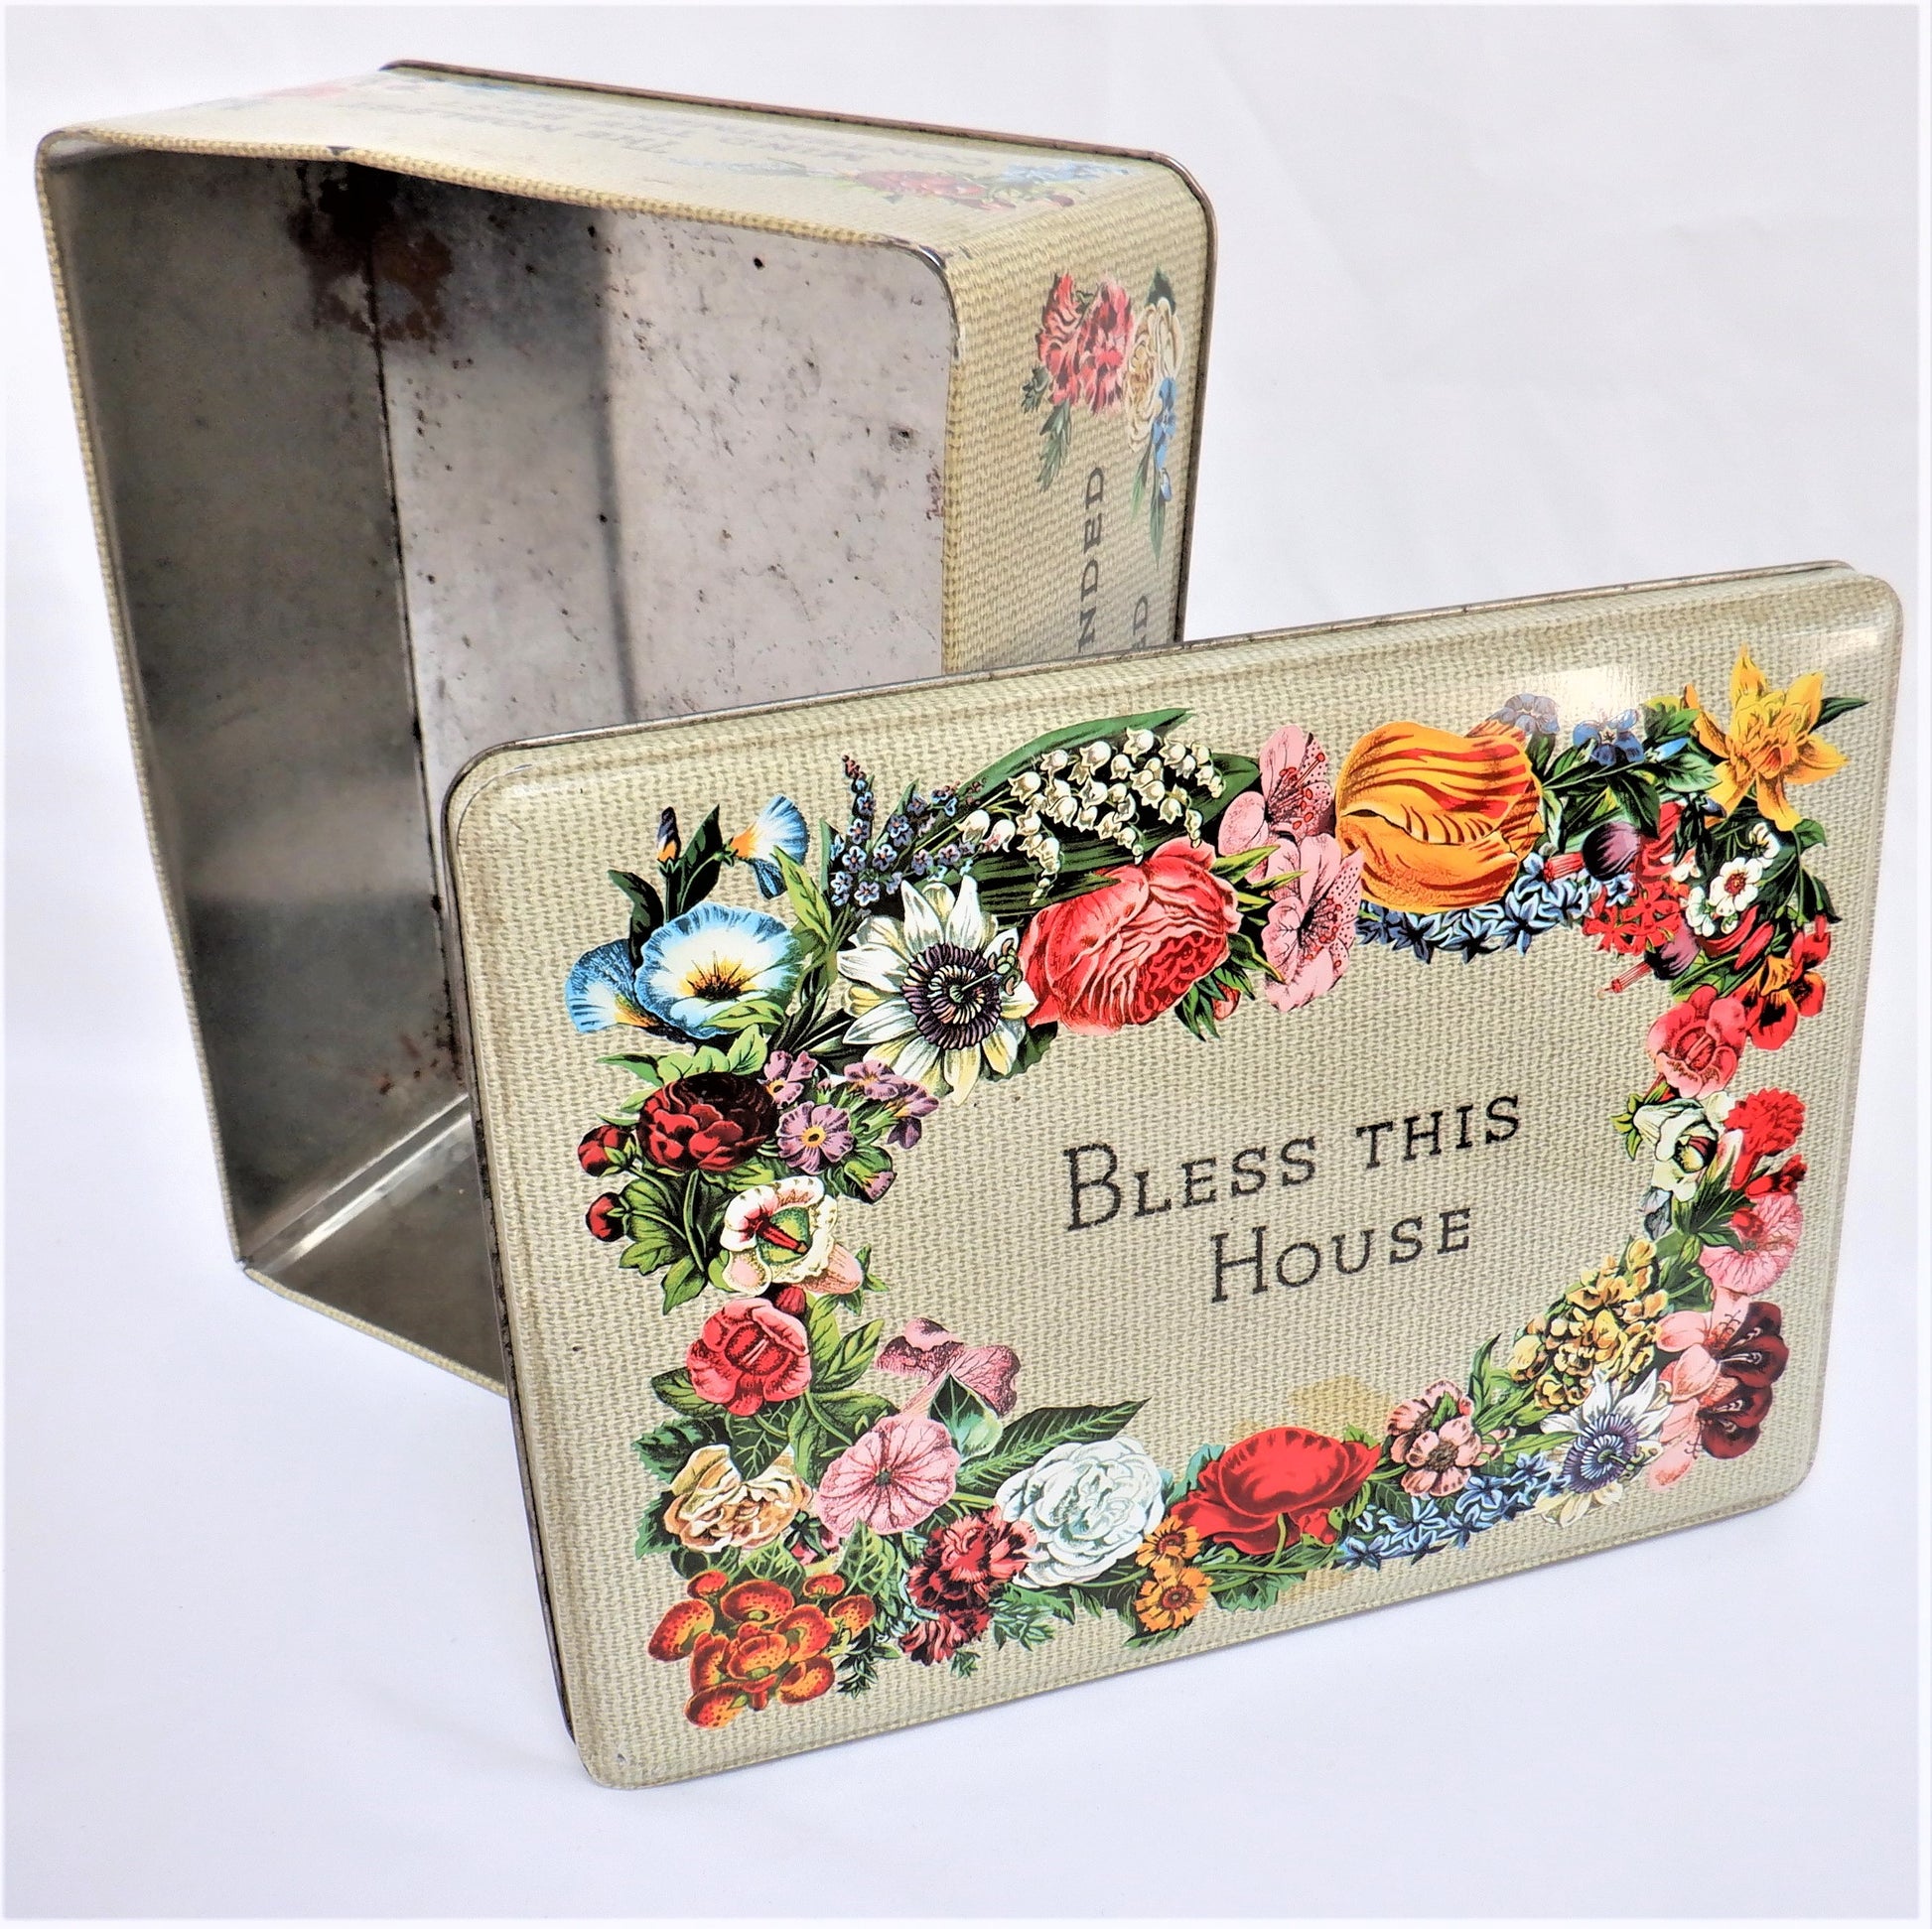 BLESS THIS HOUSE', A Large Vintage Cookie Tin Container, by Carr's